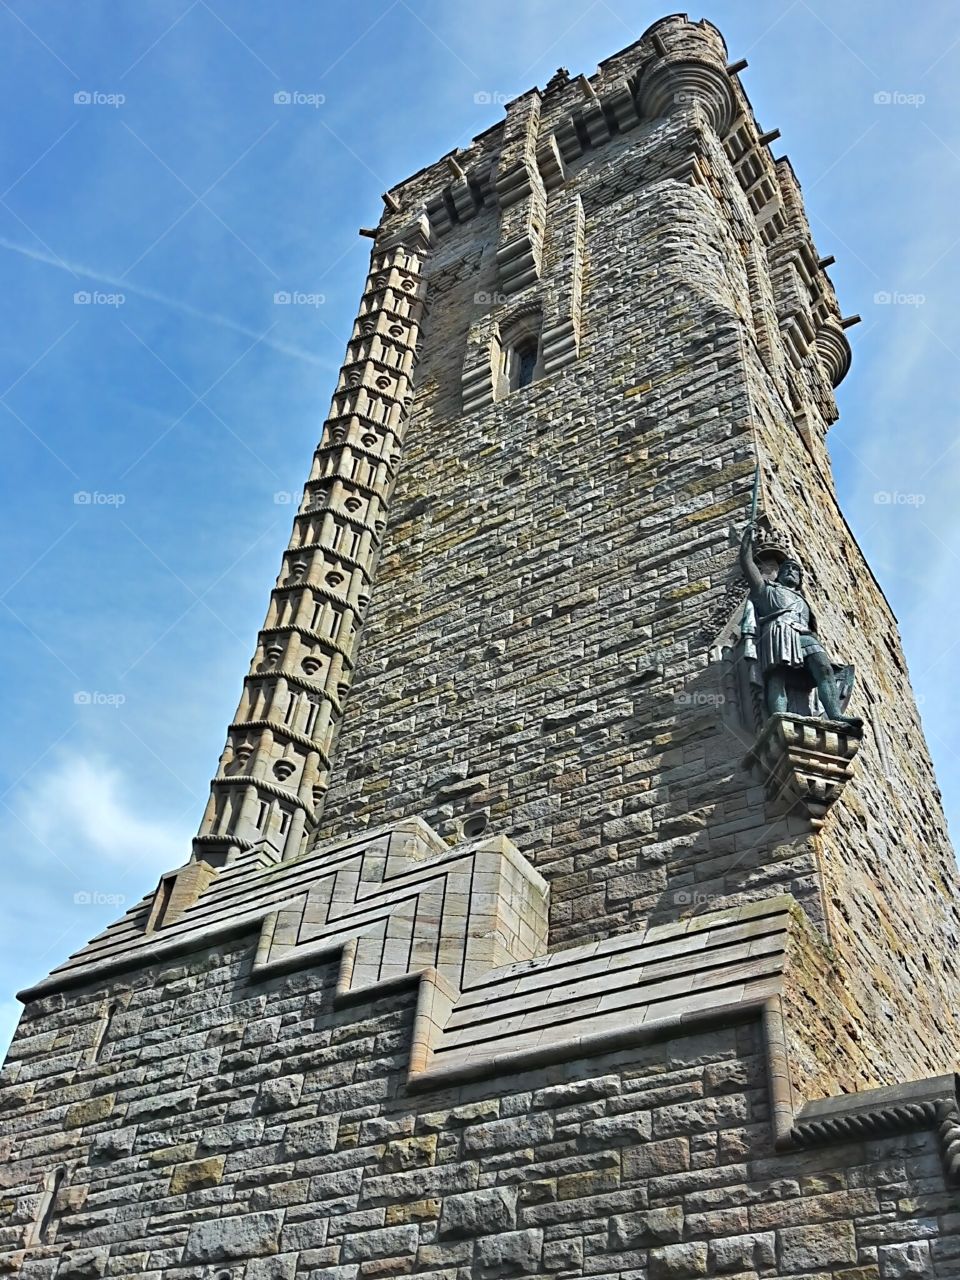 wallace tower